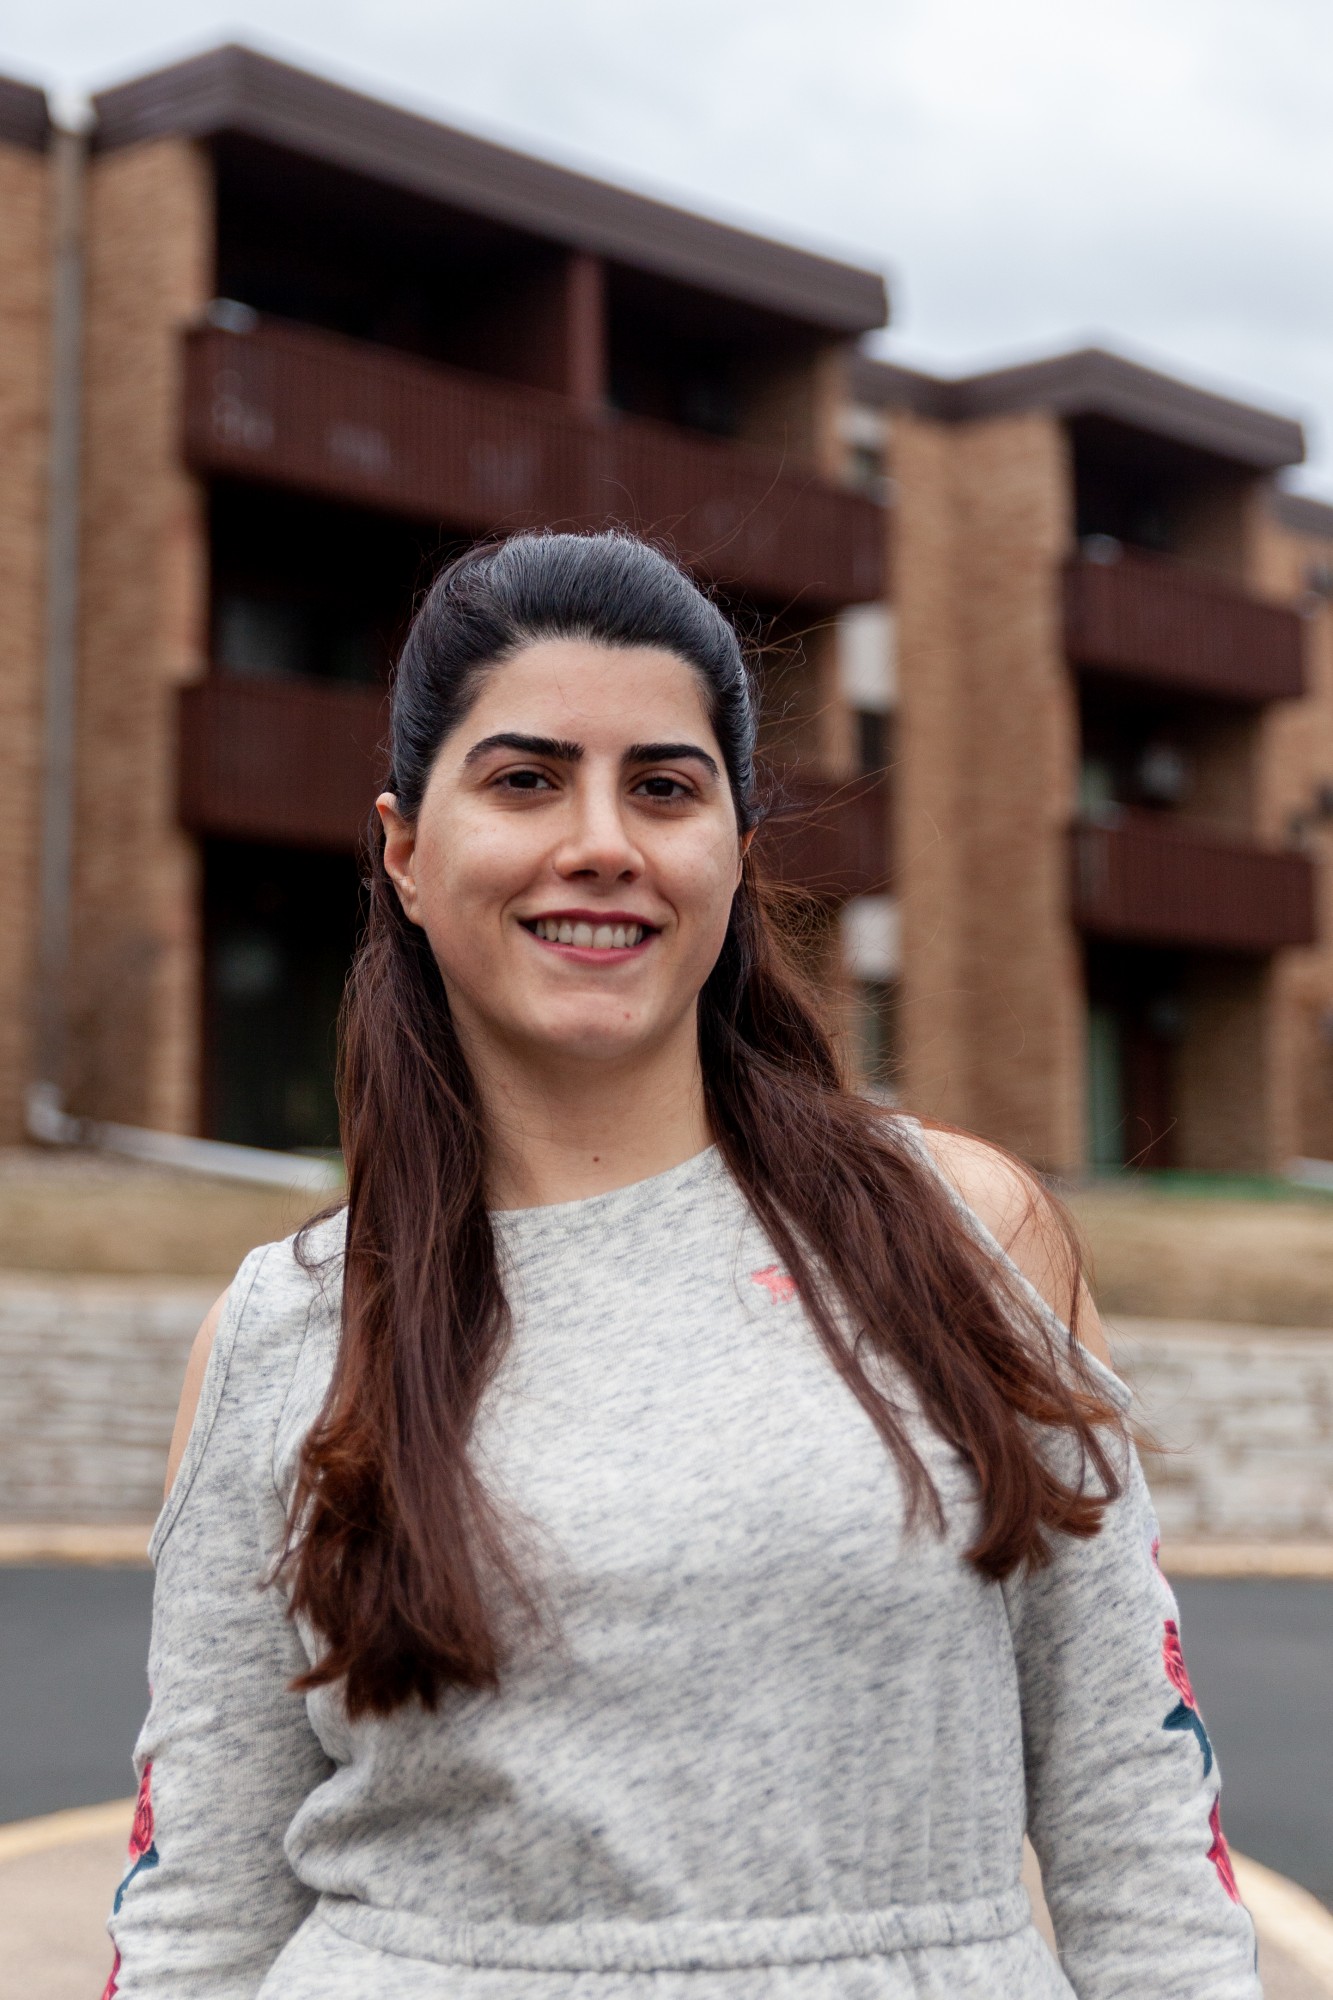 Senior Maryam Zahedi poses for a portrait at her apartment in Roseville on Saturday, March 21. The Persian New Year, traditionally celebrated with gatherings of friends and family, has been greatly impacted by restrictions on human interaction implemented in response to COVID-19.